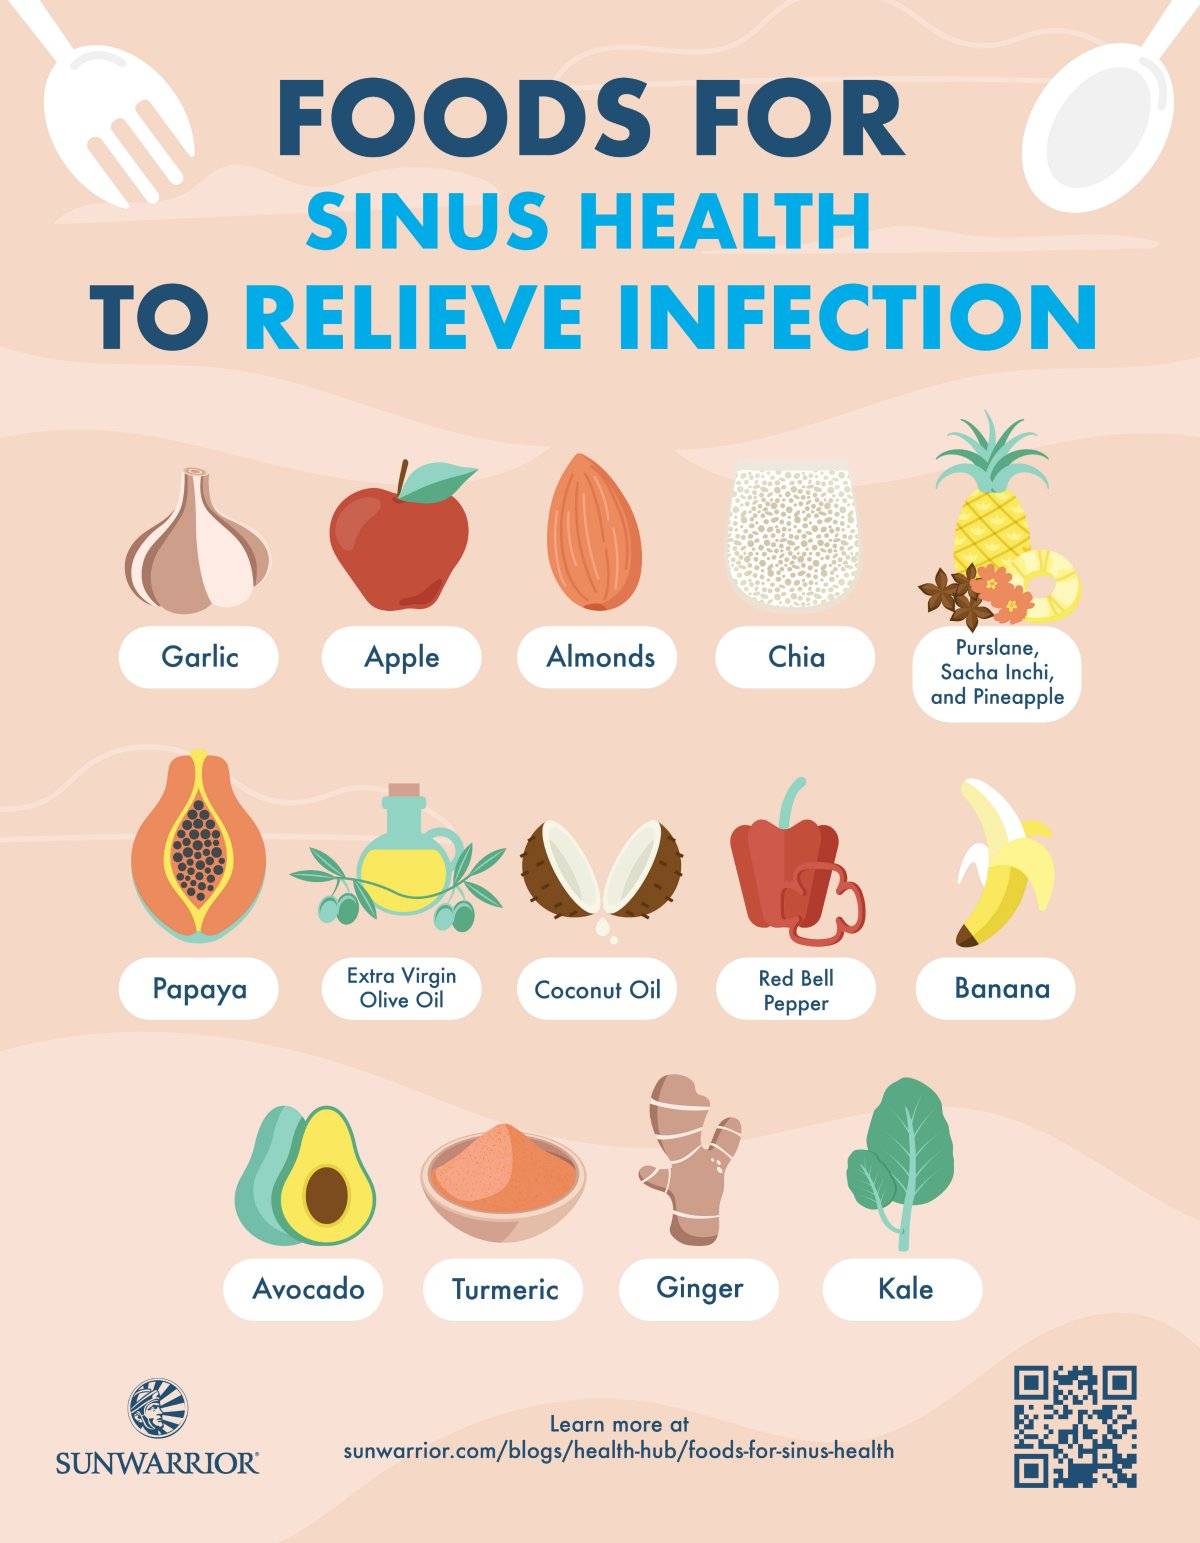 10 Foods For Sinus Health 10 Ways To Relieve Infection Infographic